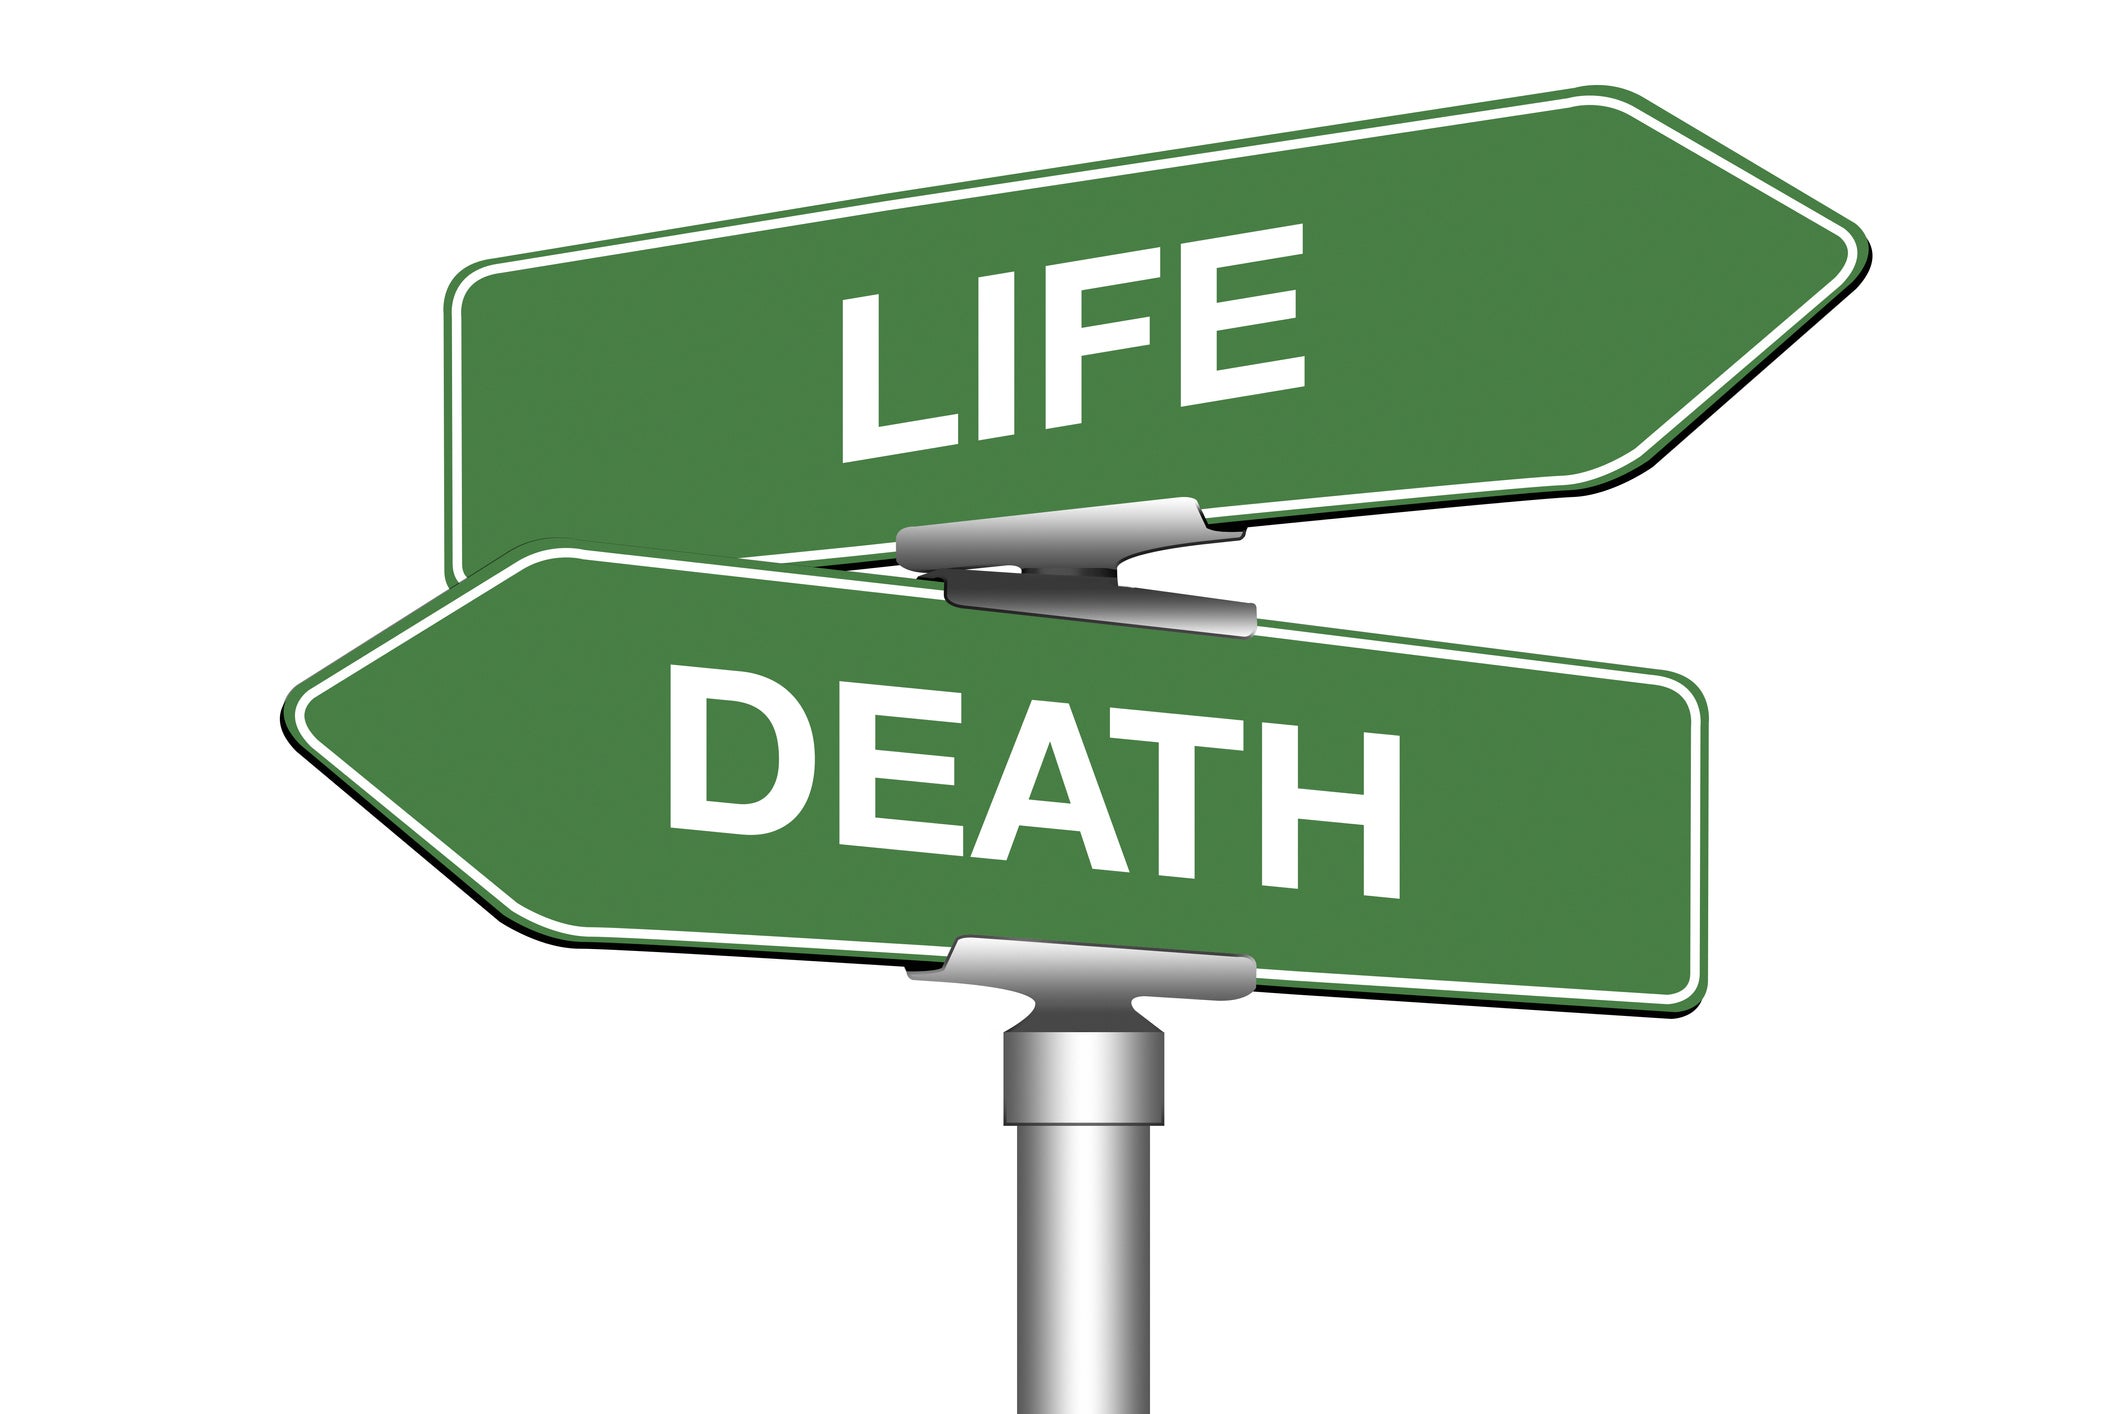 BOOKS: To live or to die? That is the question